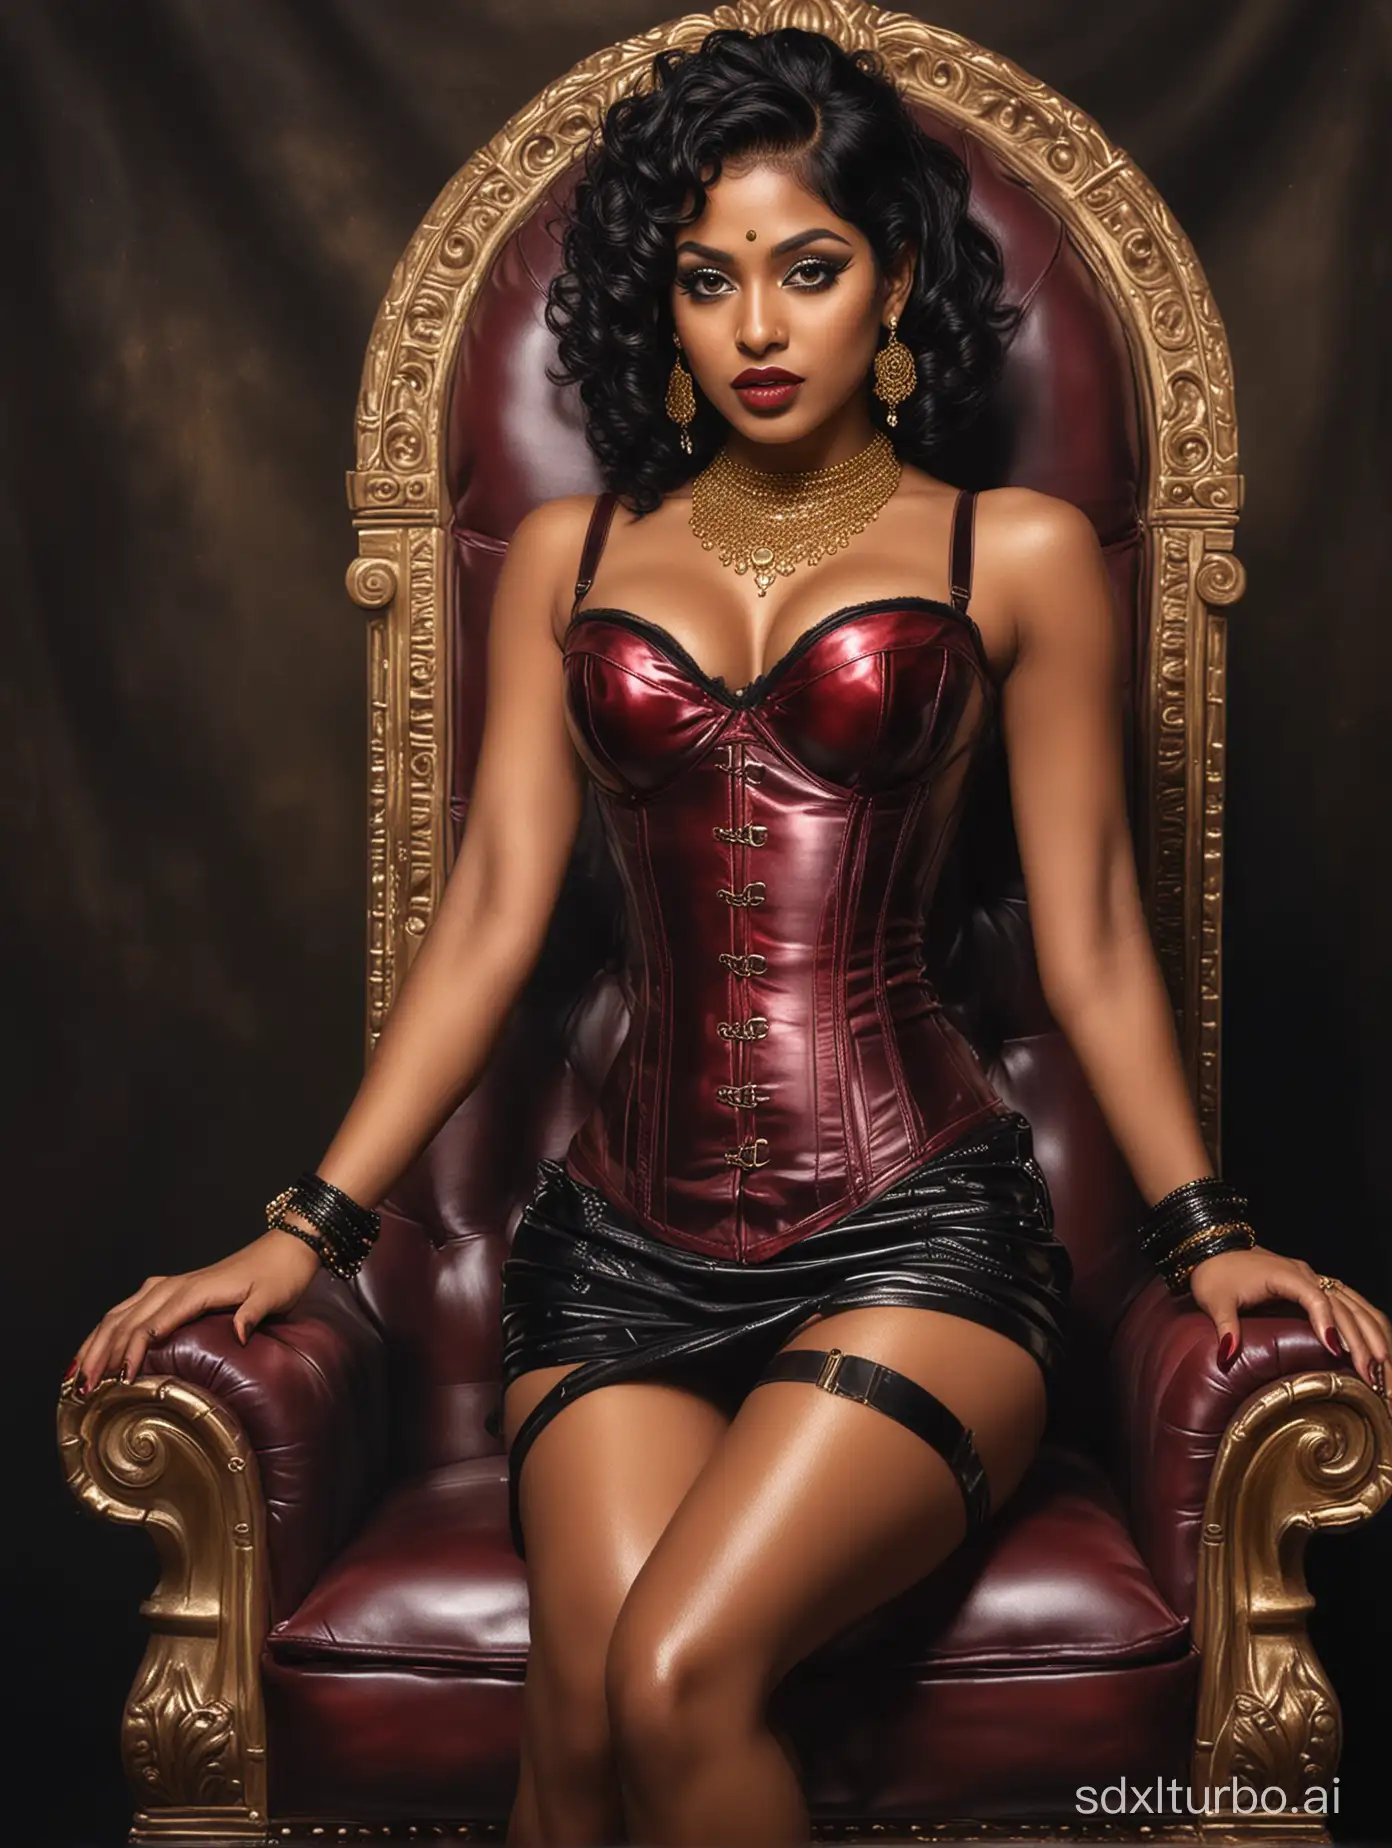 hyper realistic full body head to toe oil painting image of an tan black colored south indian tamil dommy mistress dominatrix mature lady, short straight curly glossy hair, glossy leather corset outfit, wearing gold jewellery nose pentant and head piece jwellery,flawless glossy bronze makeup and glossy burgundy lips, golden black eyeshadow and dramatic eyelashes silver Black colour contact lenses,eye makeup, metalic burgundy colour glossy polished coffin shape finger nails,hands in chin, sitting in throne in cross legged, wearing golden stockings and golden black hi heels,dark black devilis palace background.